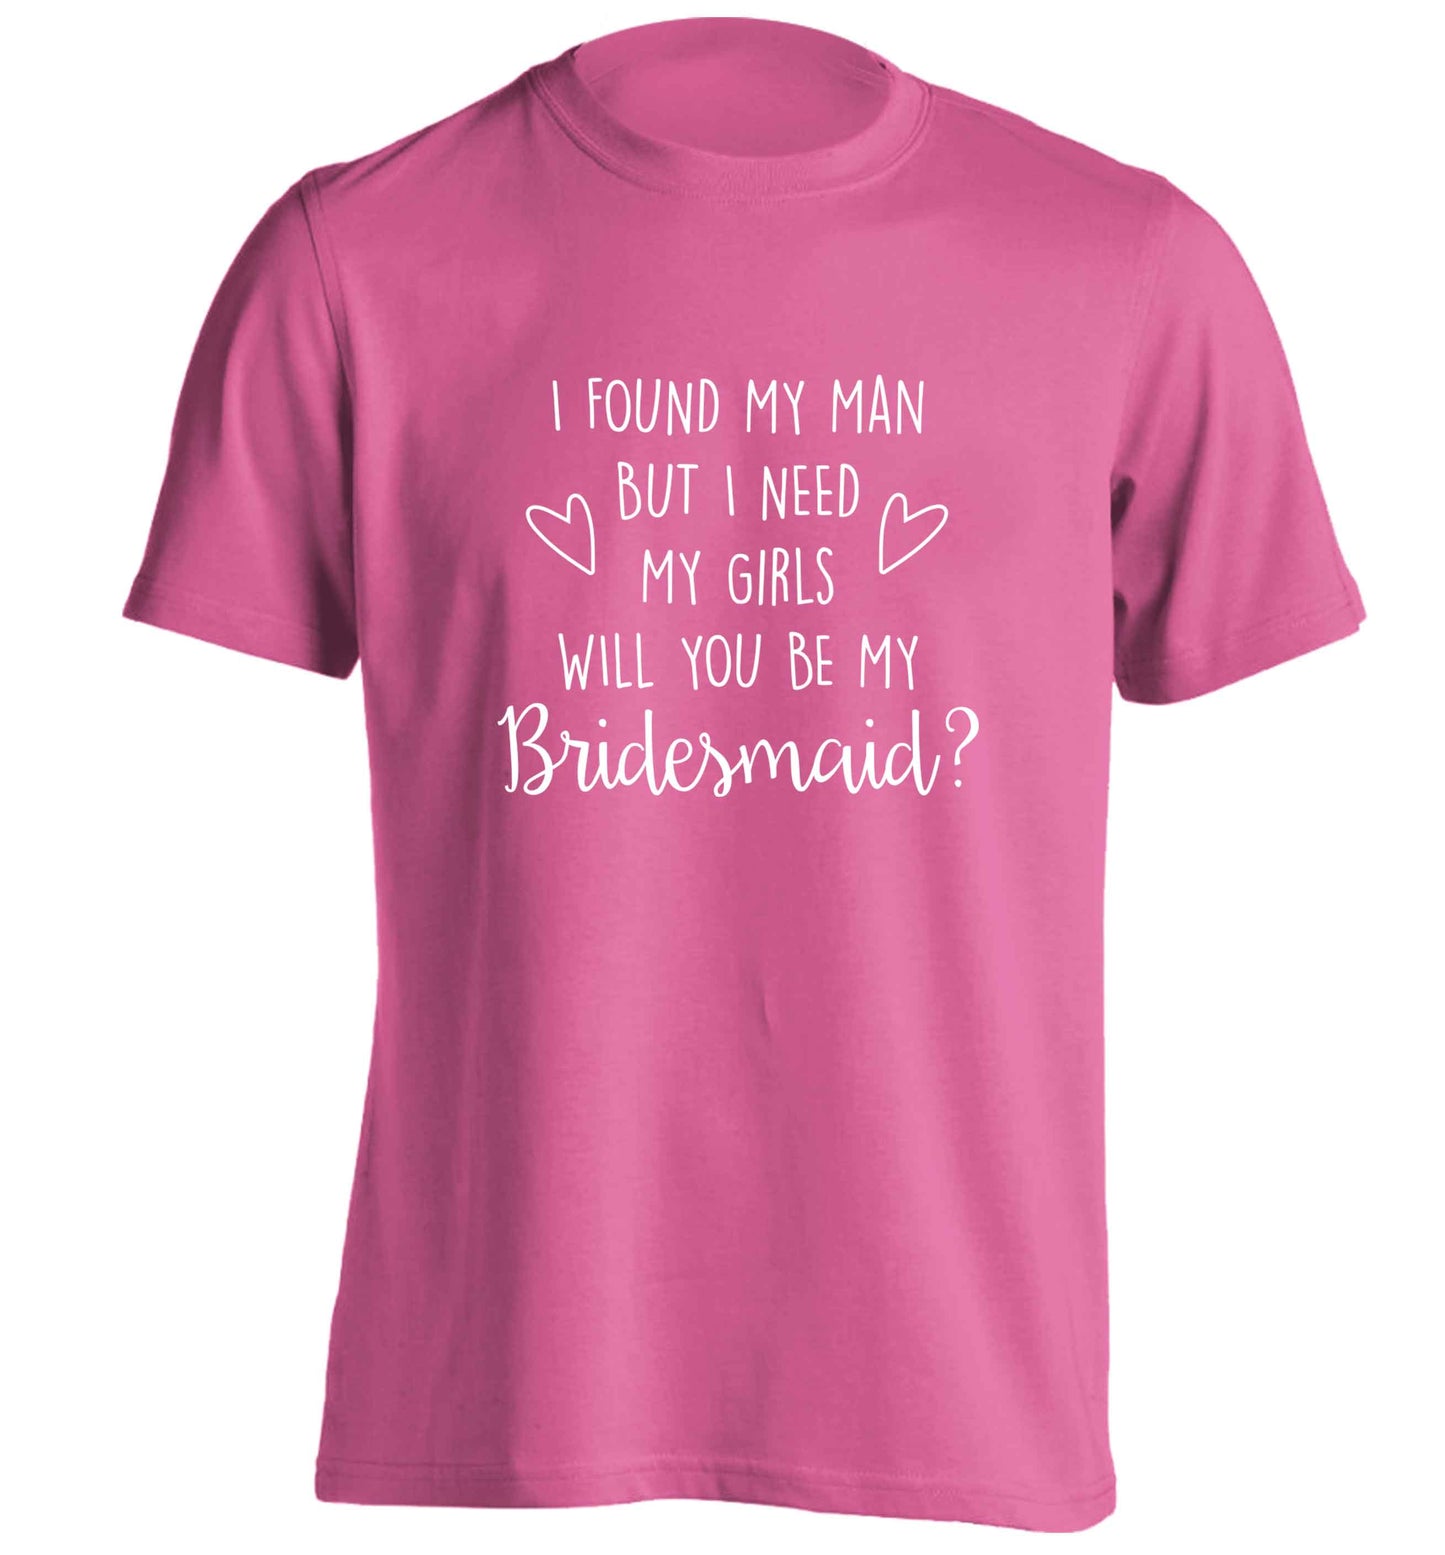 I found my man but I need my girls will you be my bridesmaid? adults unisex pink Tshirt 2XL